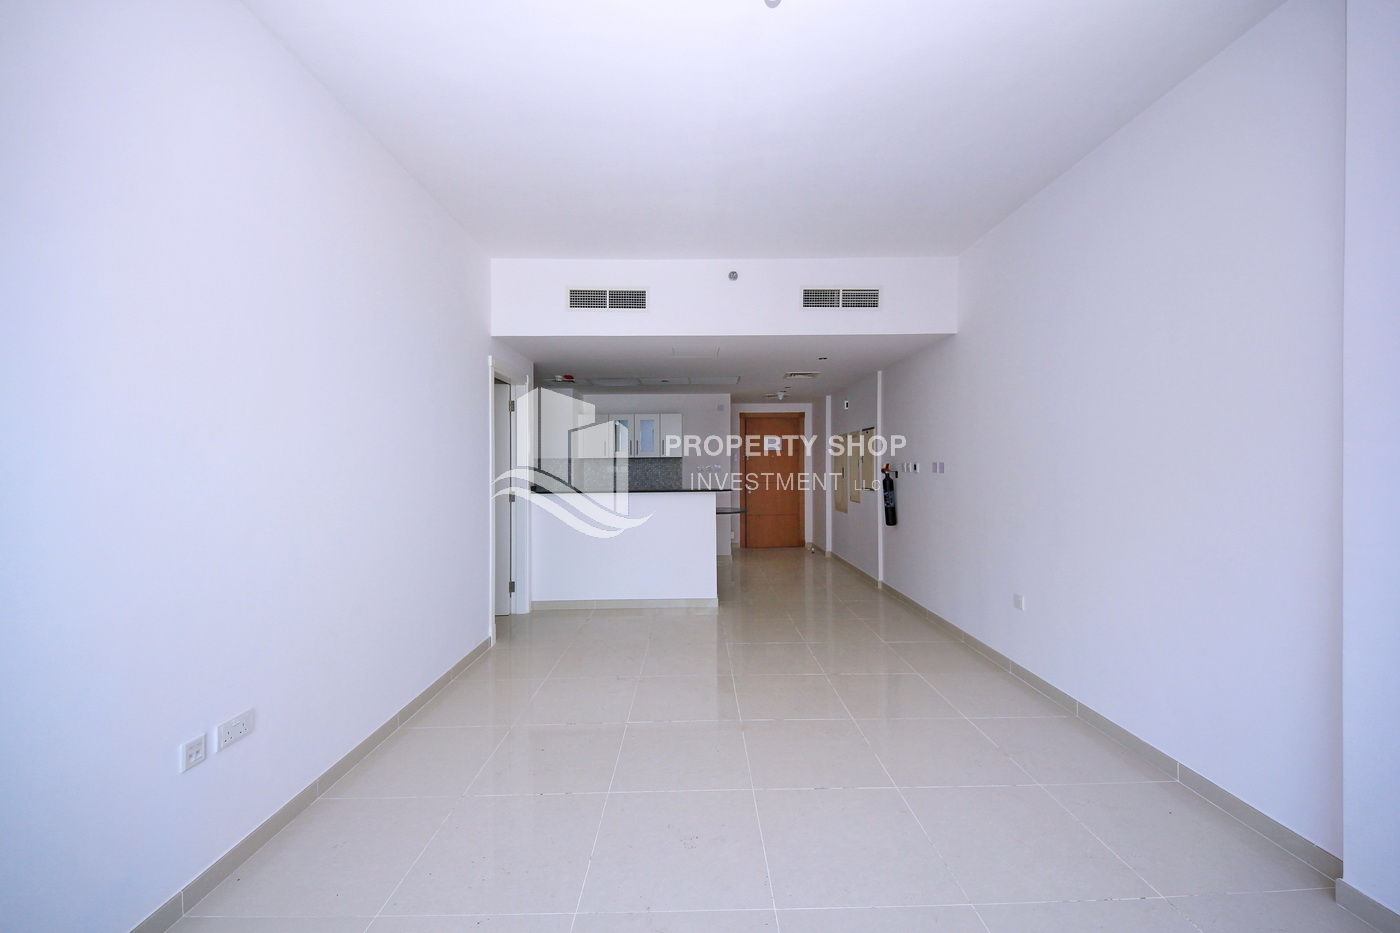 UNBEATABLE price, 3 Bedroom apartment in Marina Bay, City Of Lights